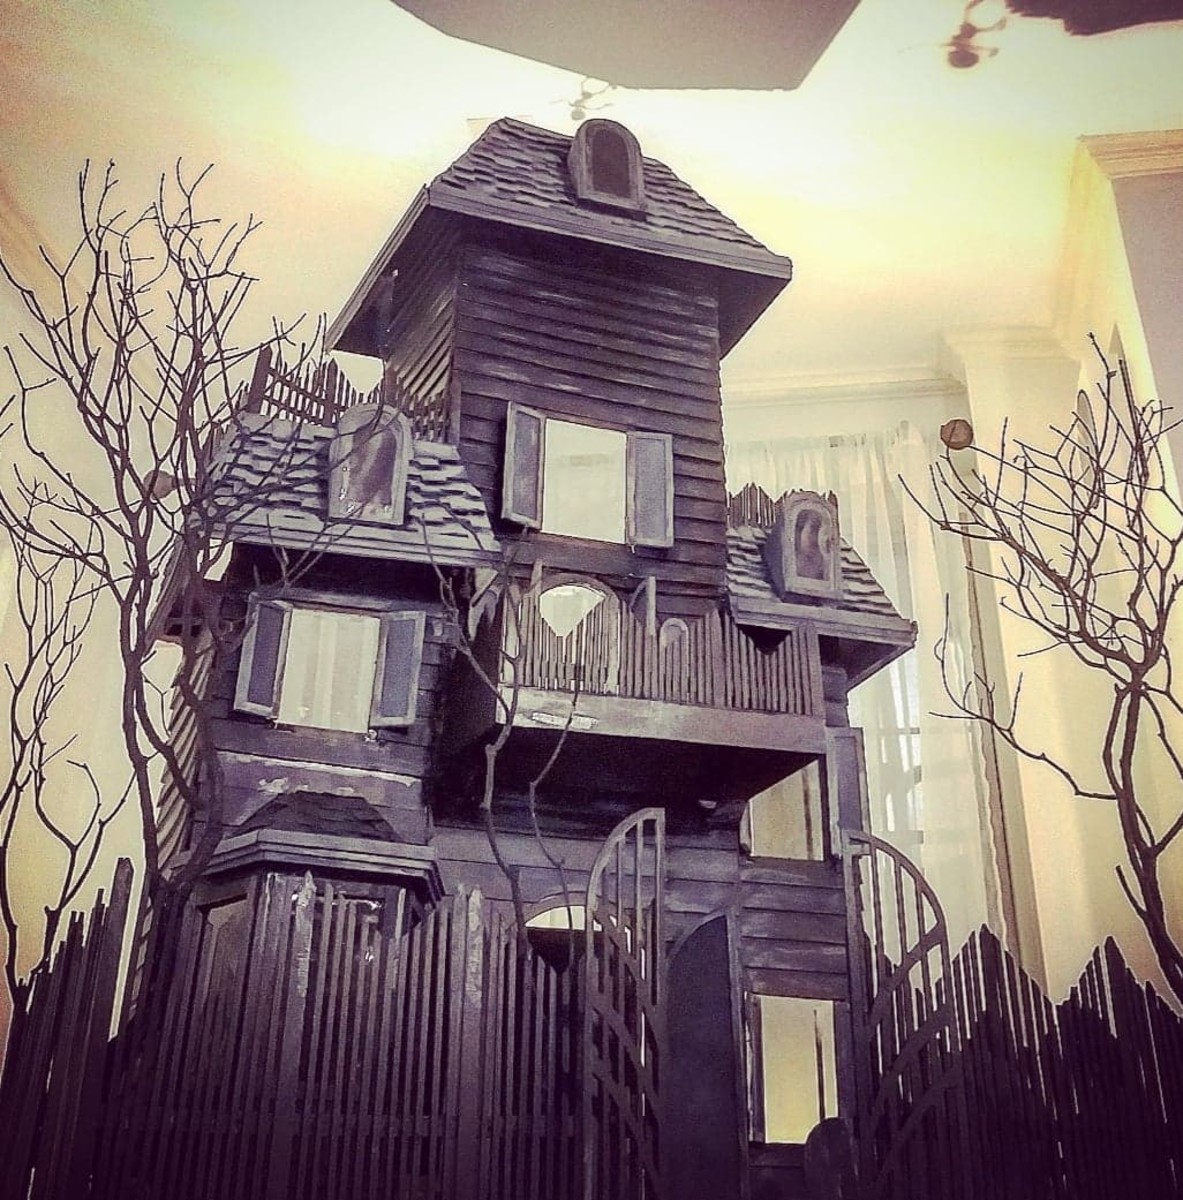 How to Make a Haunted Dollhouse